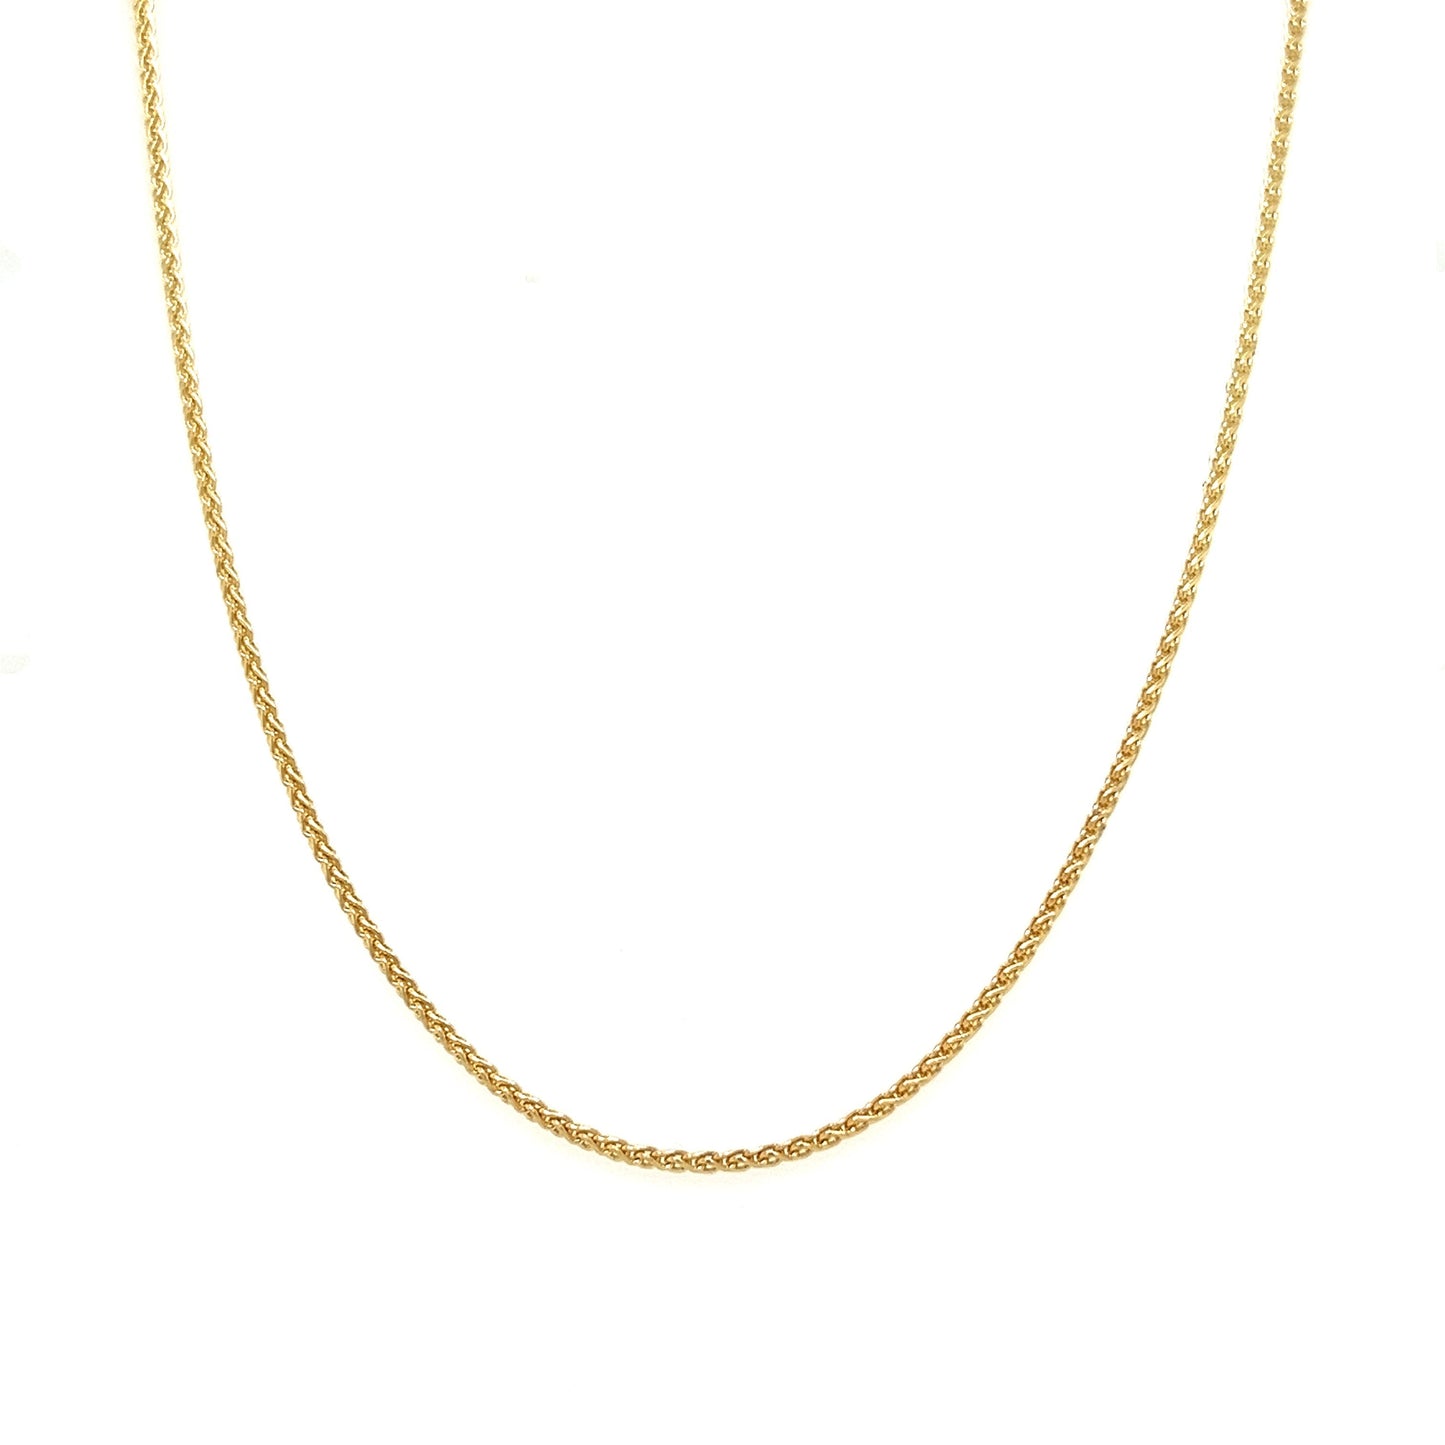 Wheat Chain 1.5mm with 20in Length in 14K Yellow Gold Front View